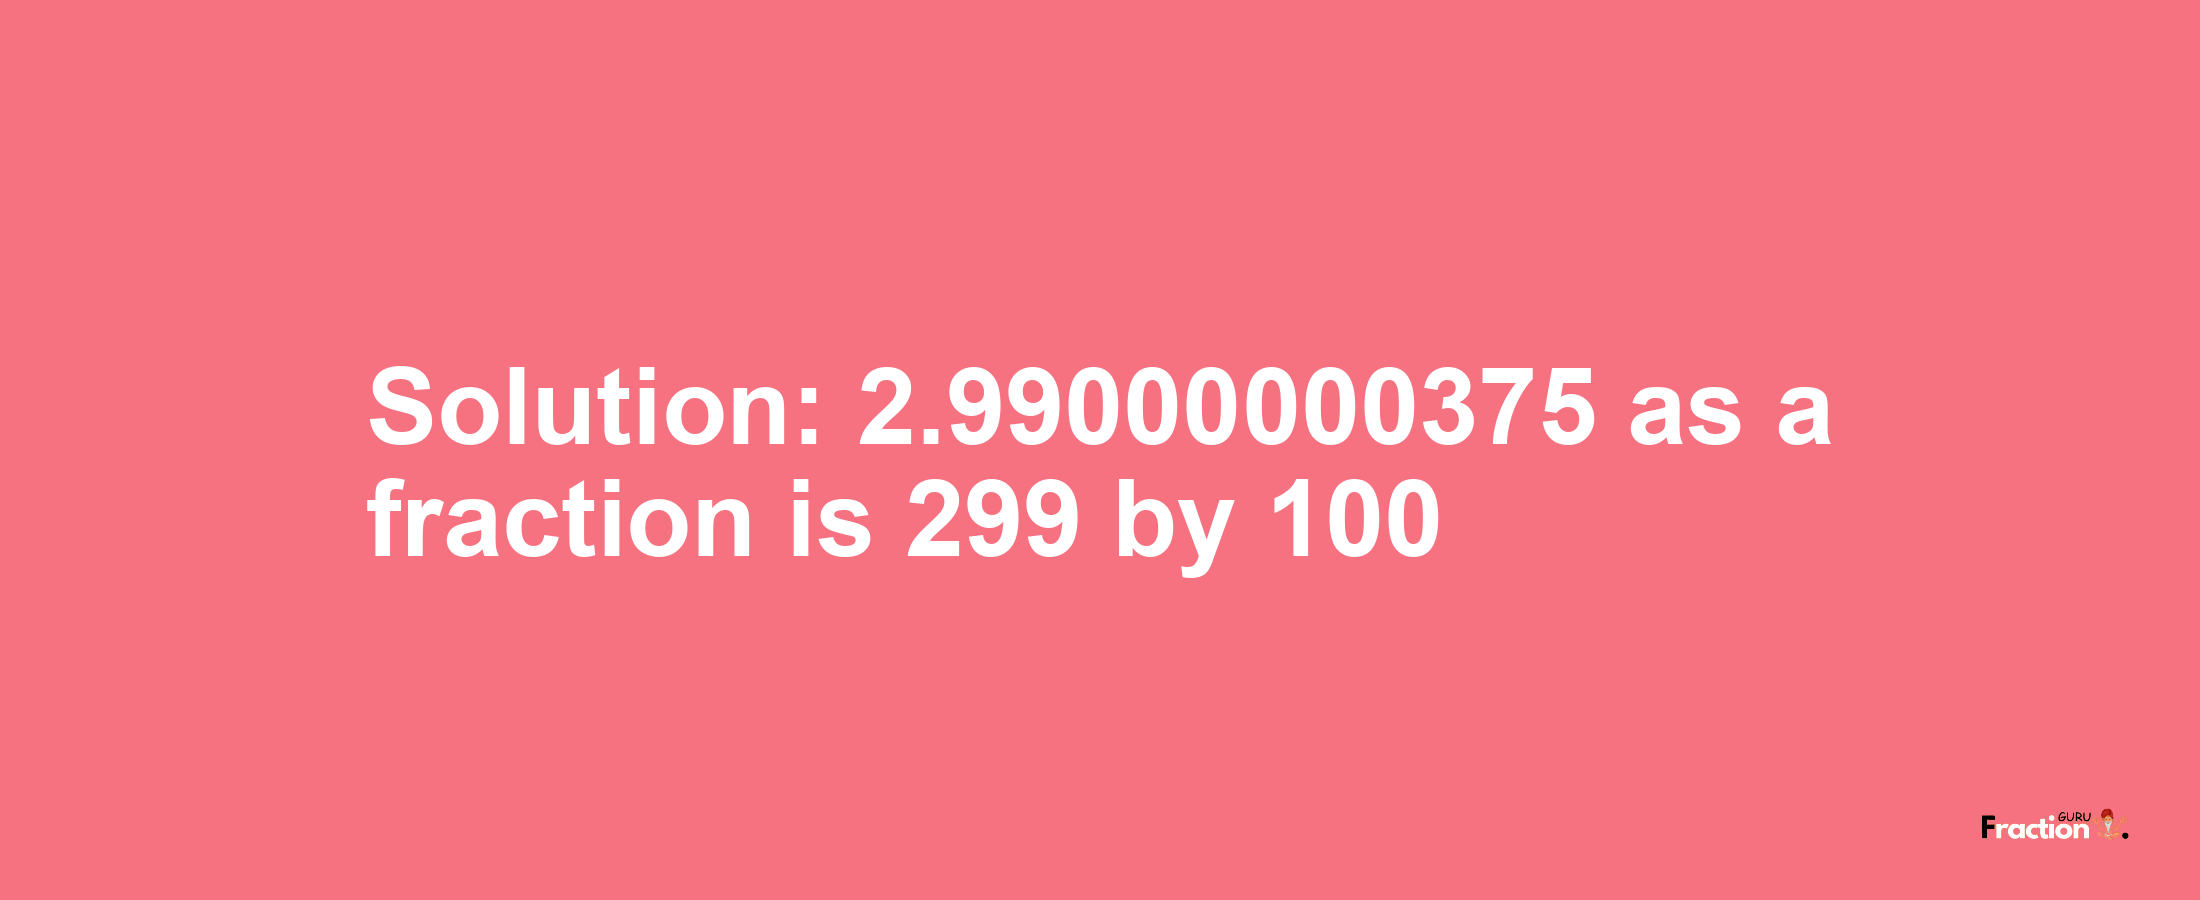 Solution:2.99000000375 as a fraction is 299/100